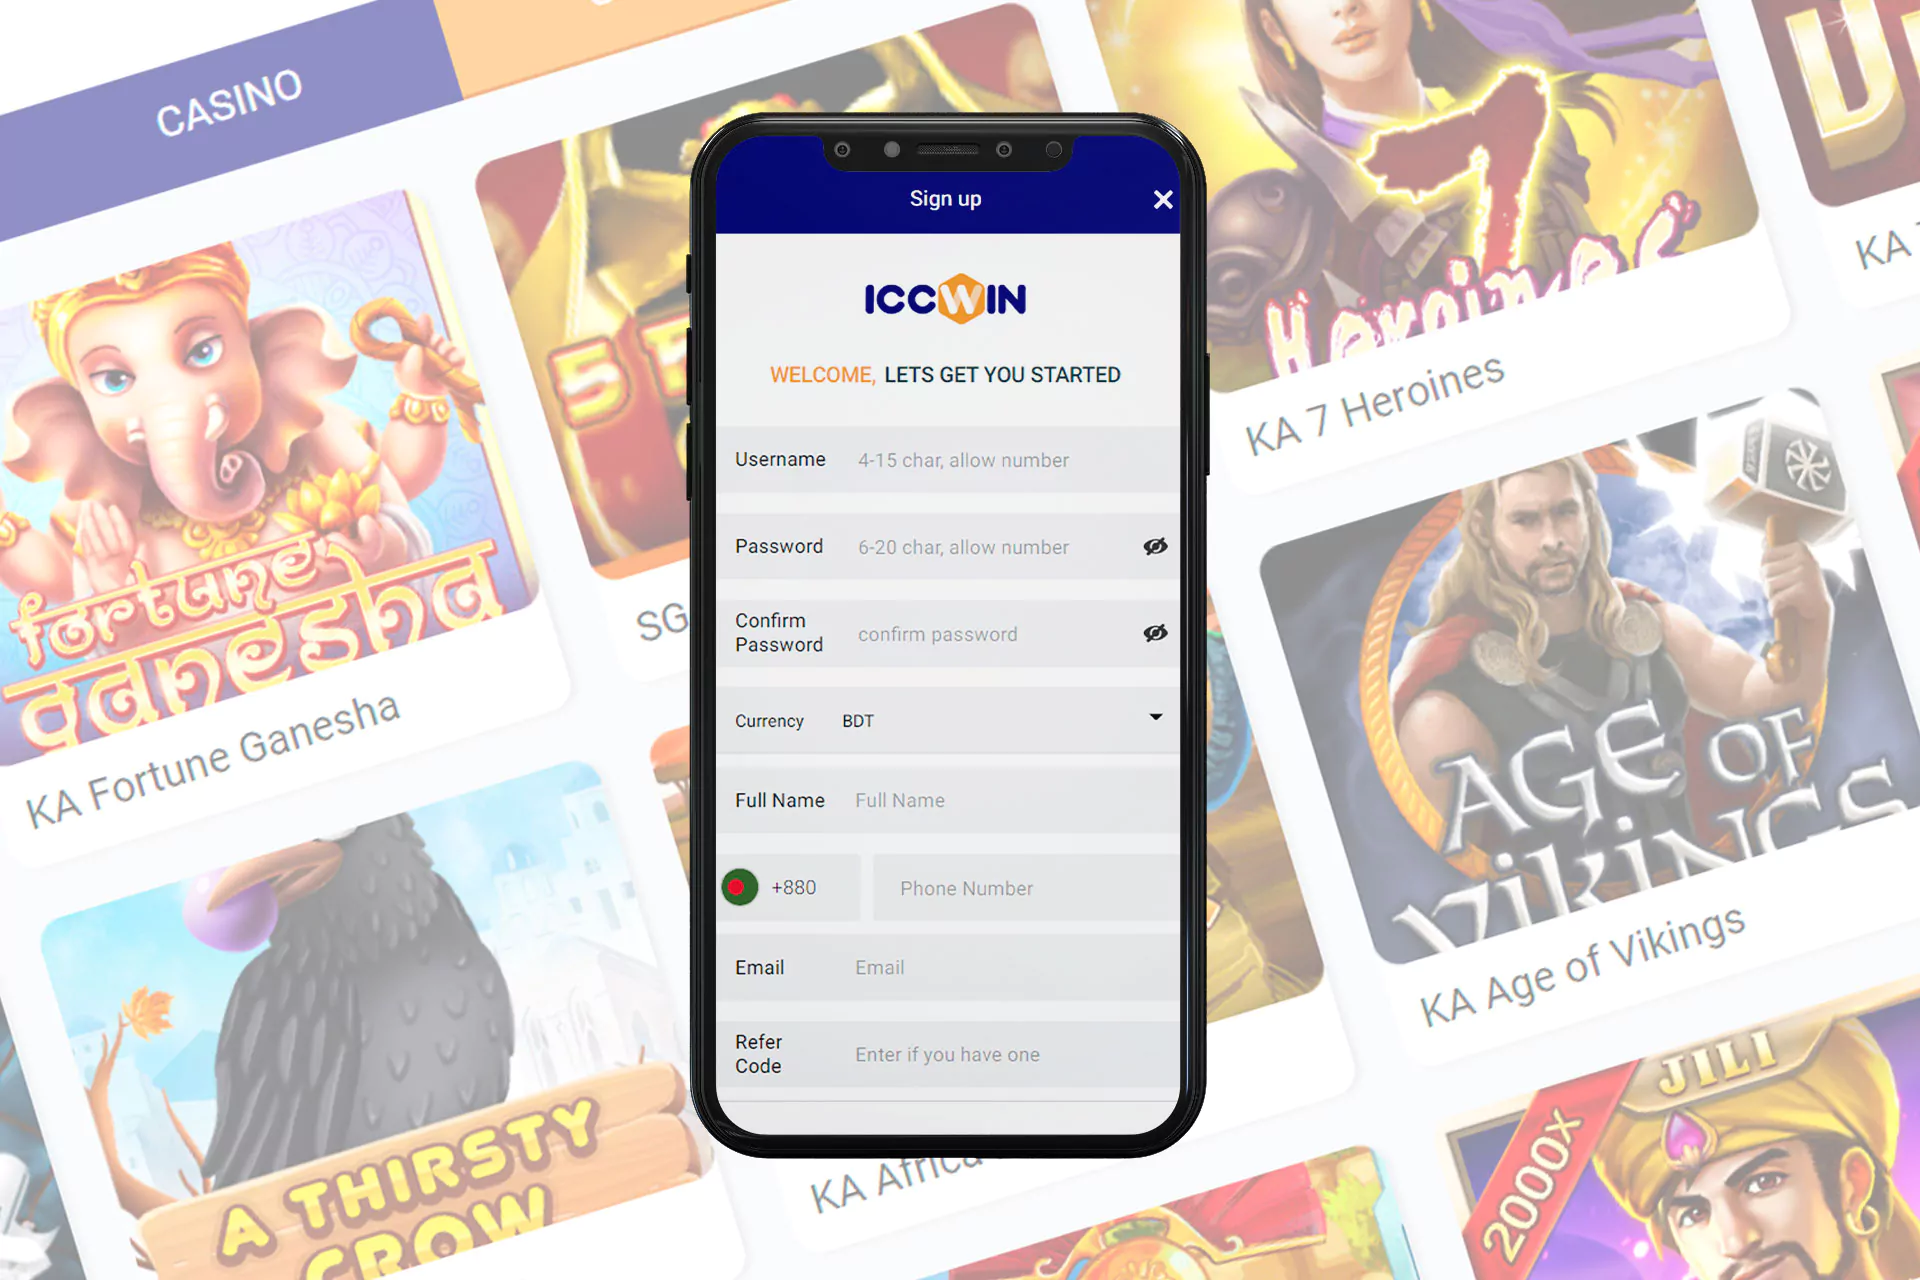 Sign up for ICCWIN to start playing casino games.